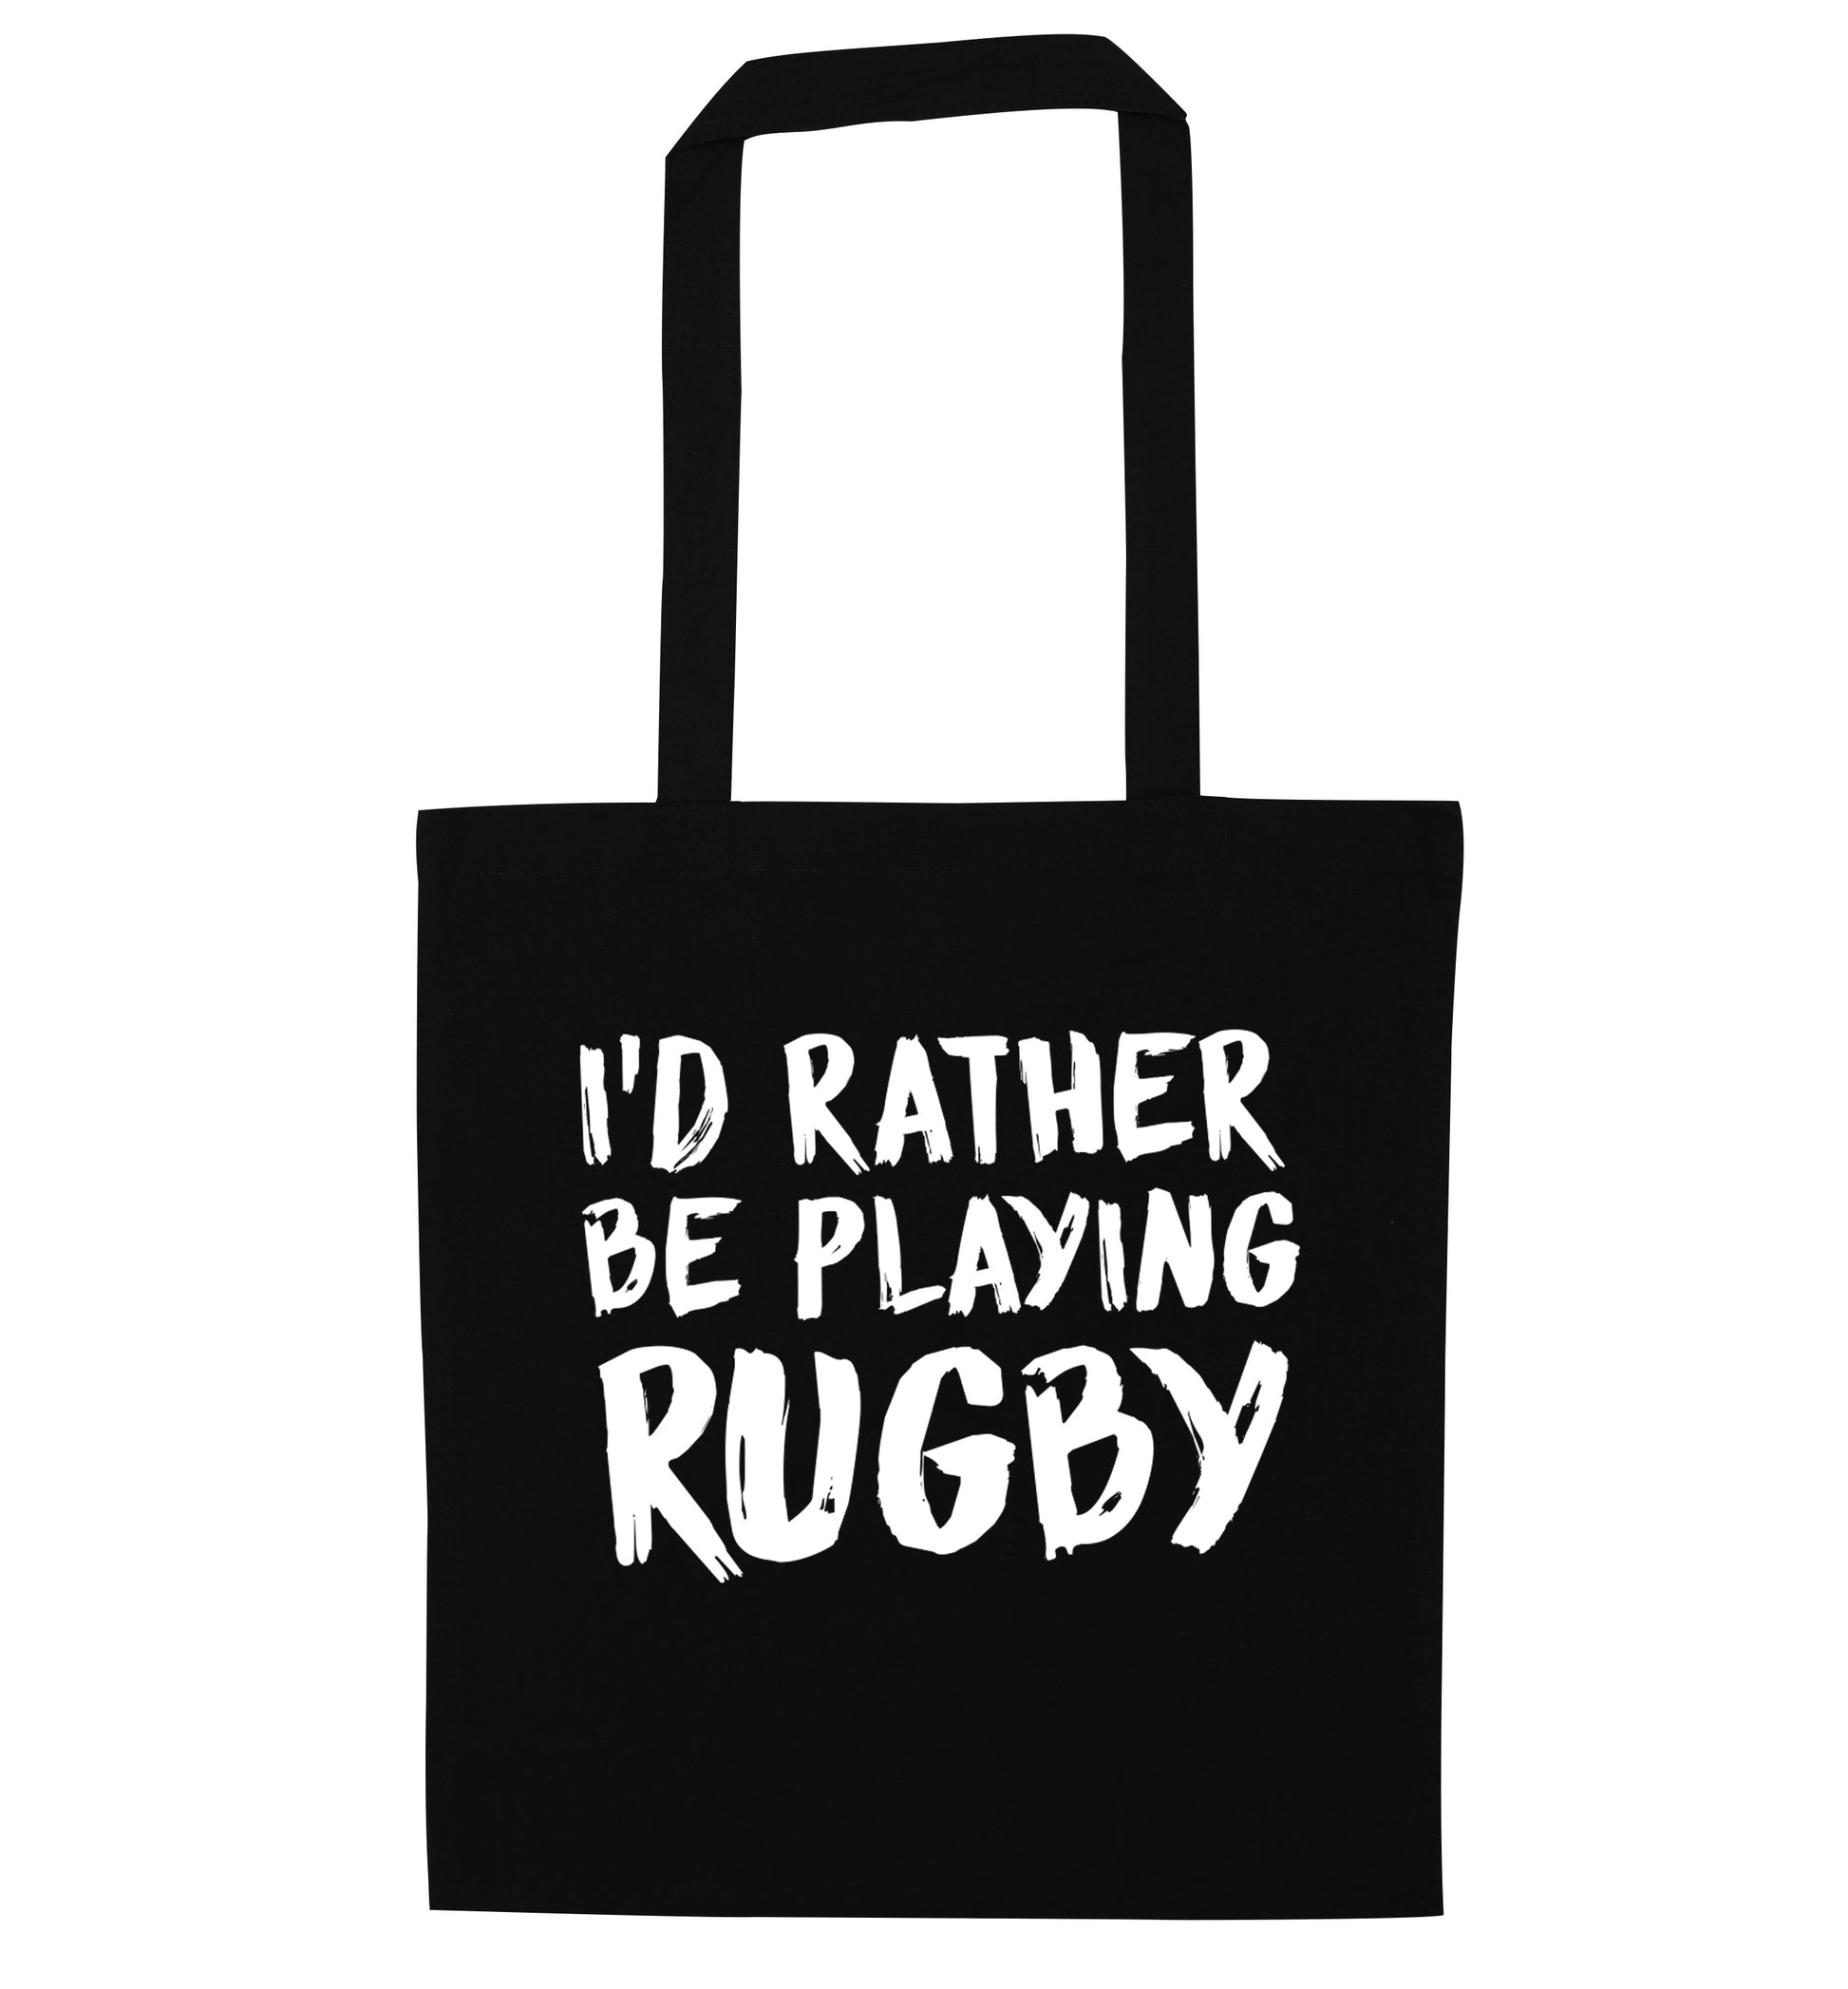 I'd rather be playing rugby black tote bag